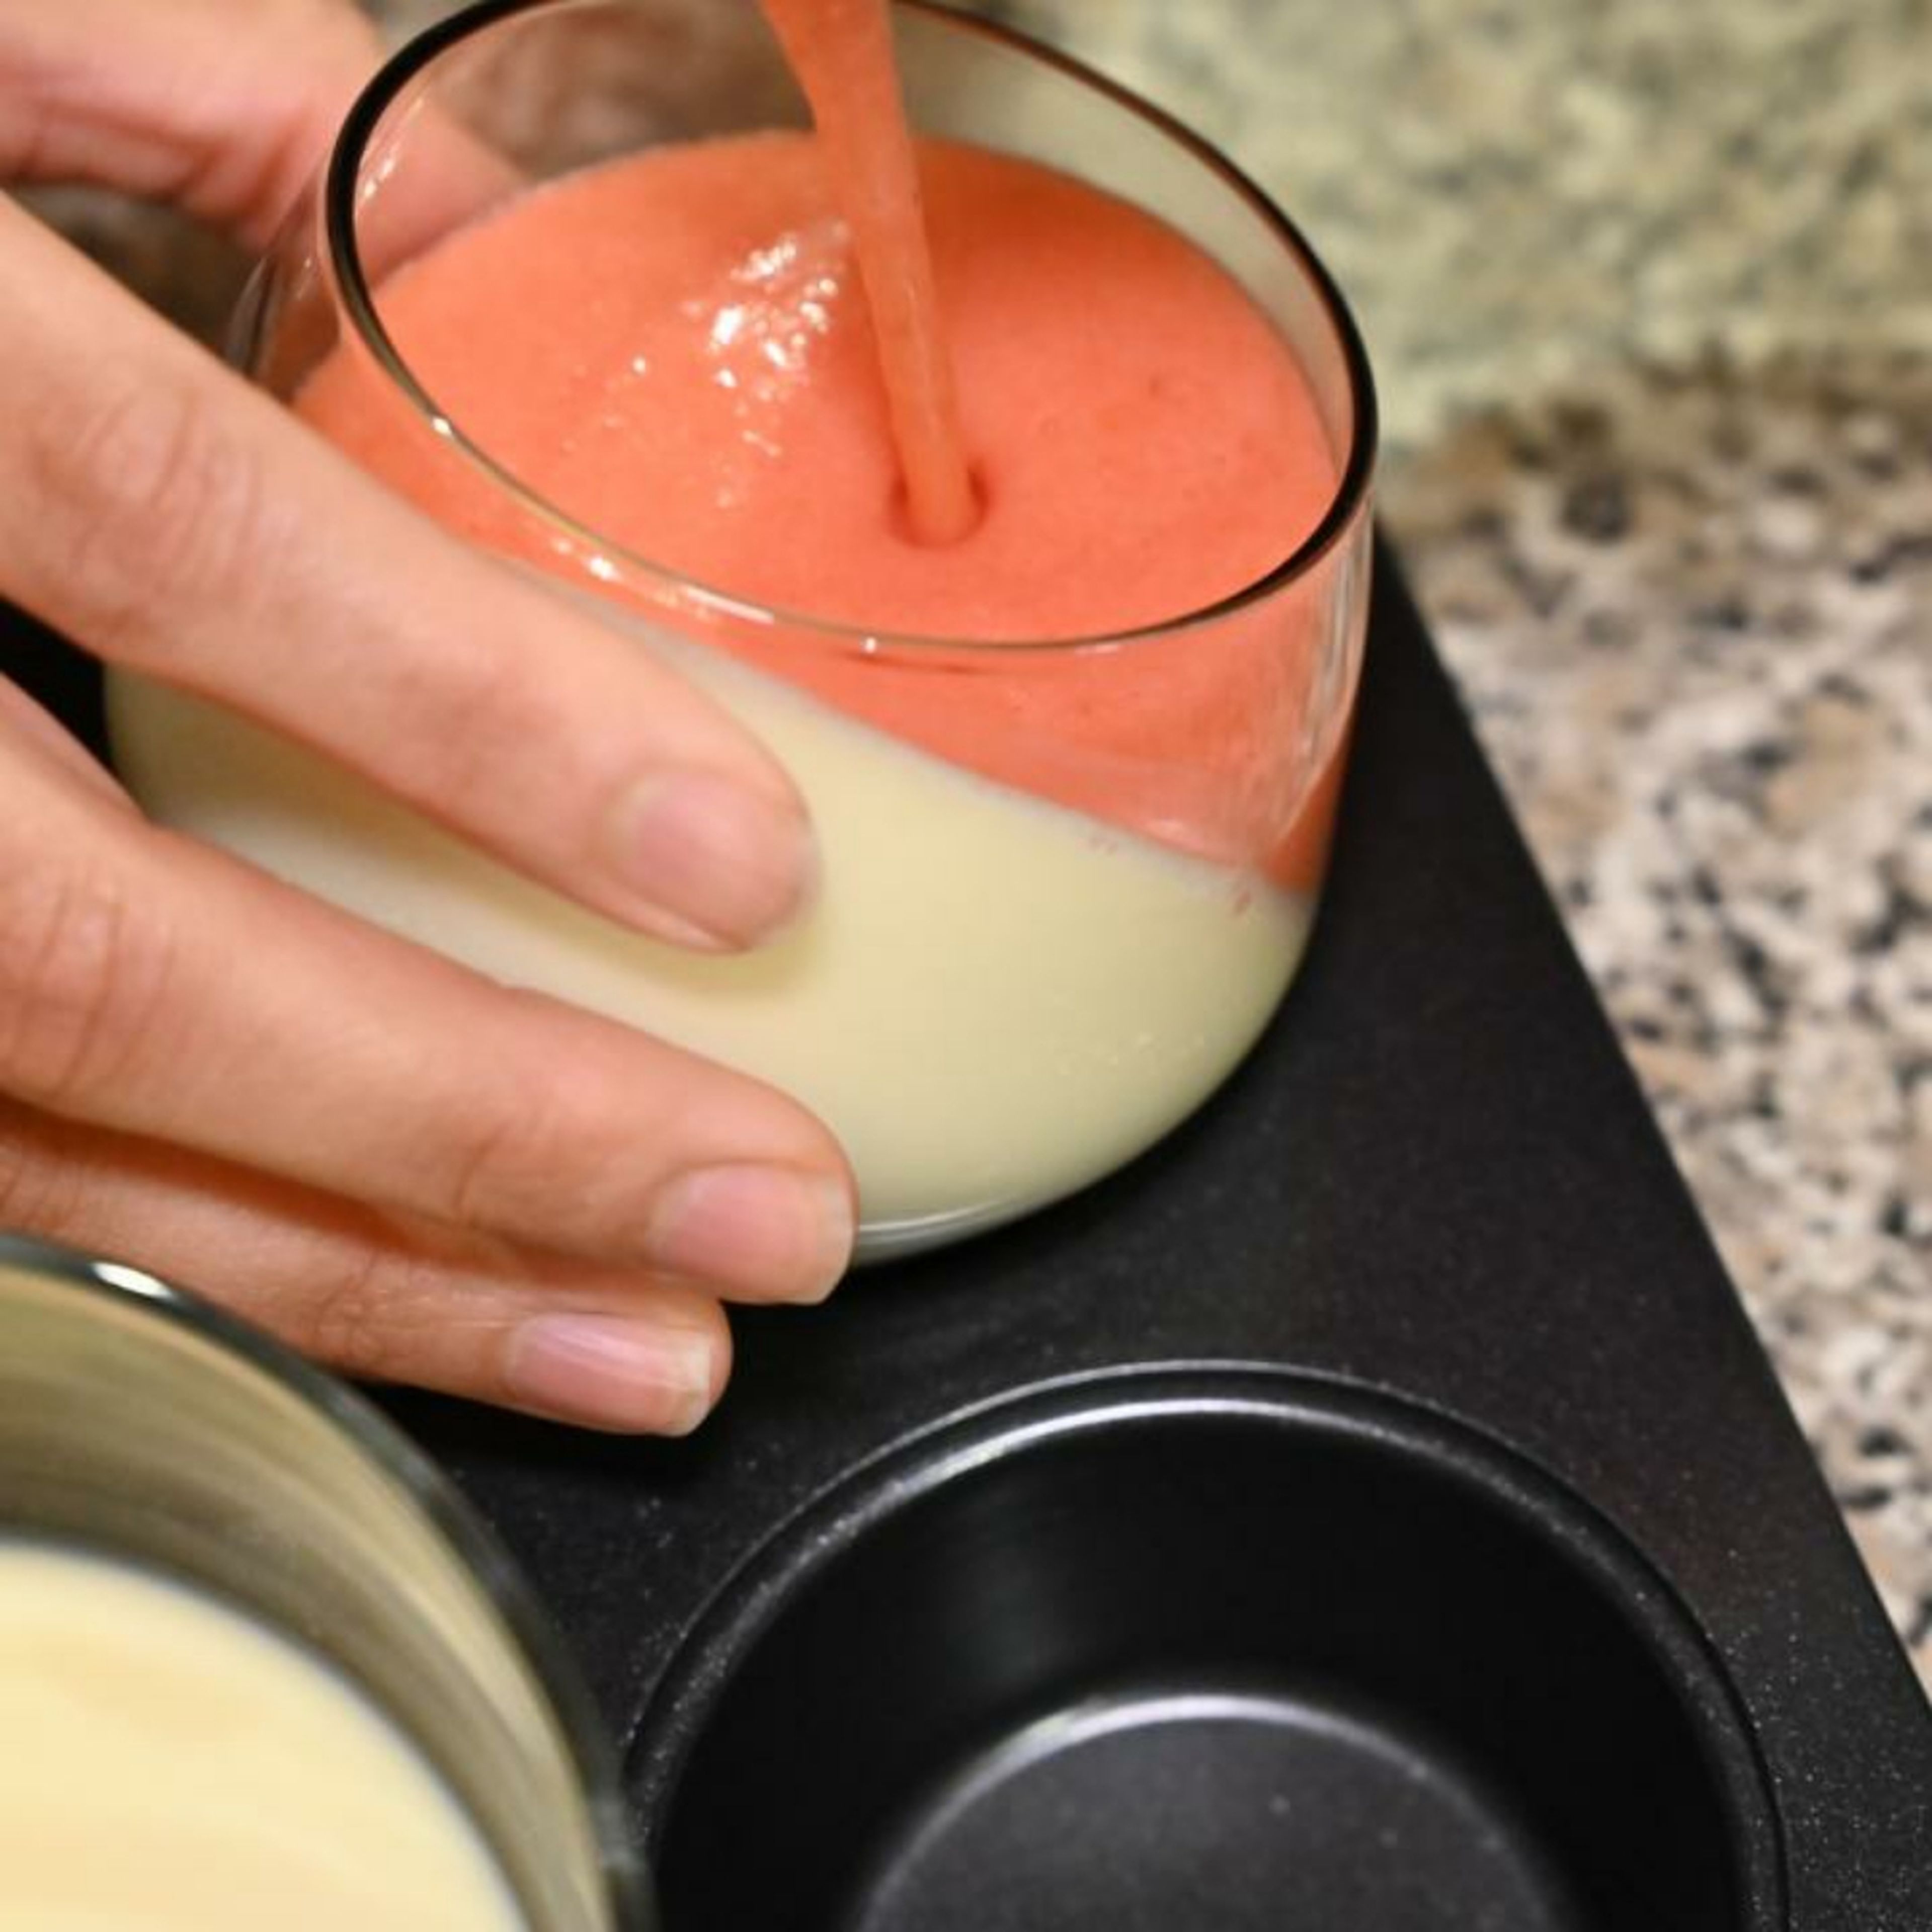 Straighten the dessert cups and pour the strawberry coulis onto the dessert cups.